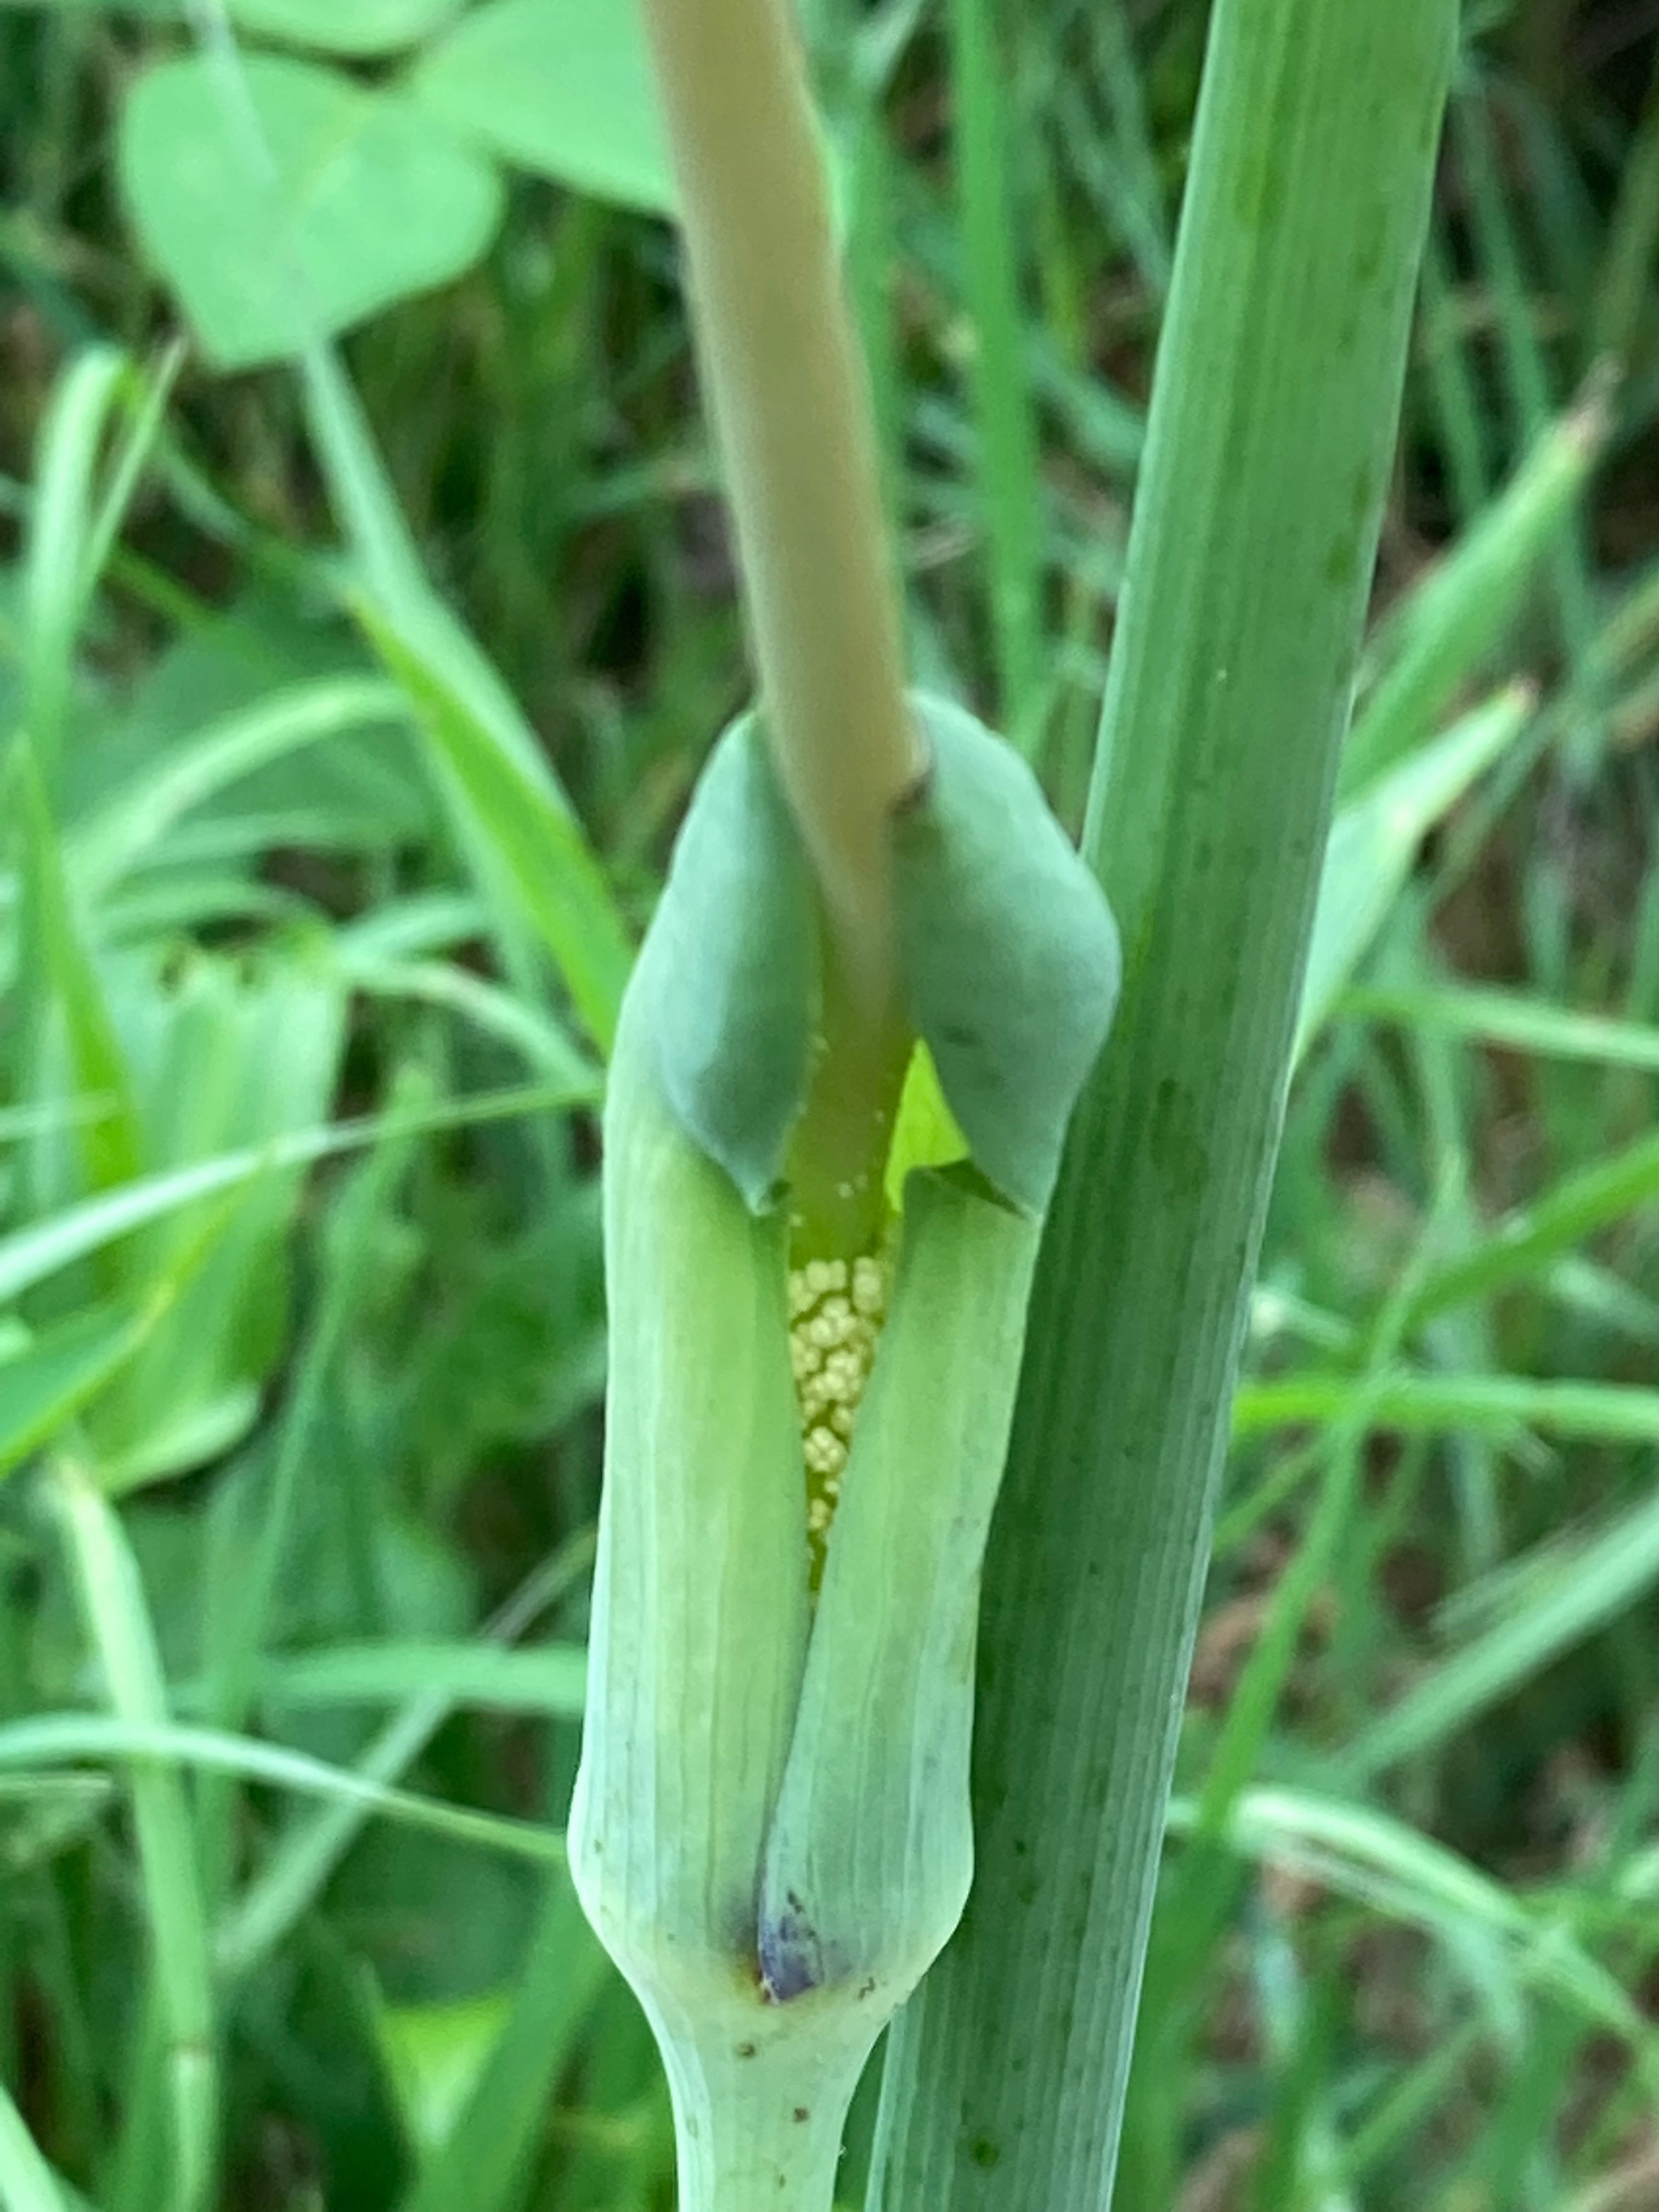 The Scientific Name is Arisaema dracontium [= Muricauda dracontium]. You will likely hear them called Green Dragon. This picture shows the Notice the spadix which extends far beyond the spathe. of Arisaema dracontium [= Muricauda dracontium]